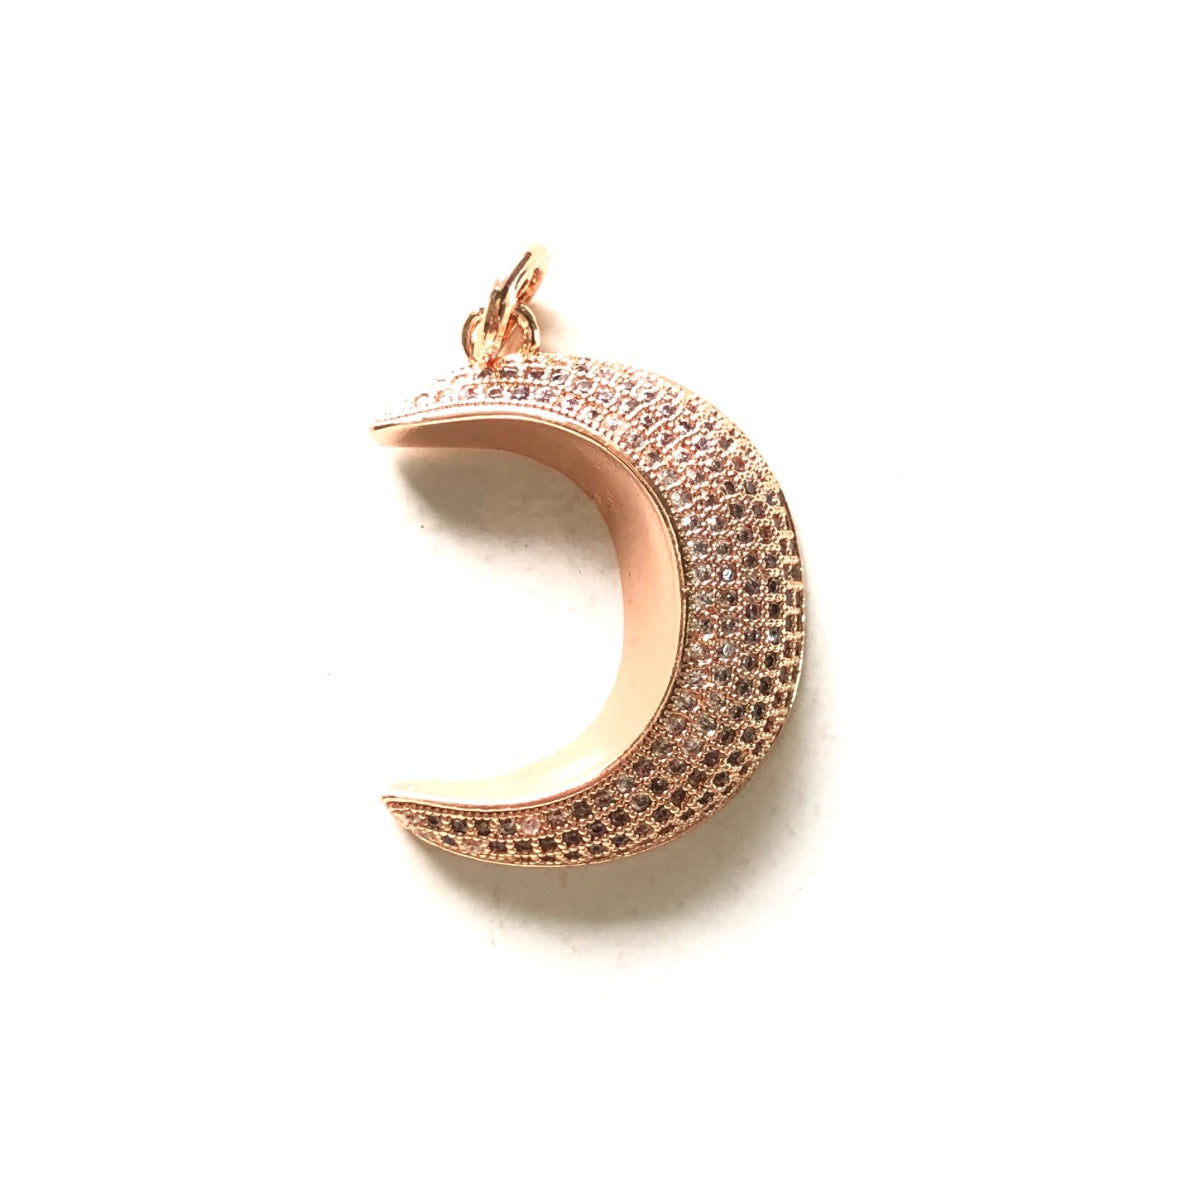 10pcs/lot 28*20.5mm CZ Paved New Moon Crescent Charms Rose Gold CZ Paved Charms Sun Moon Stars Charms Beads Beyond